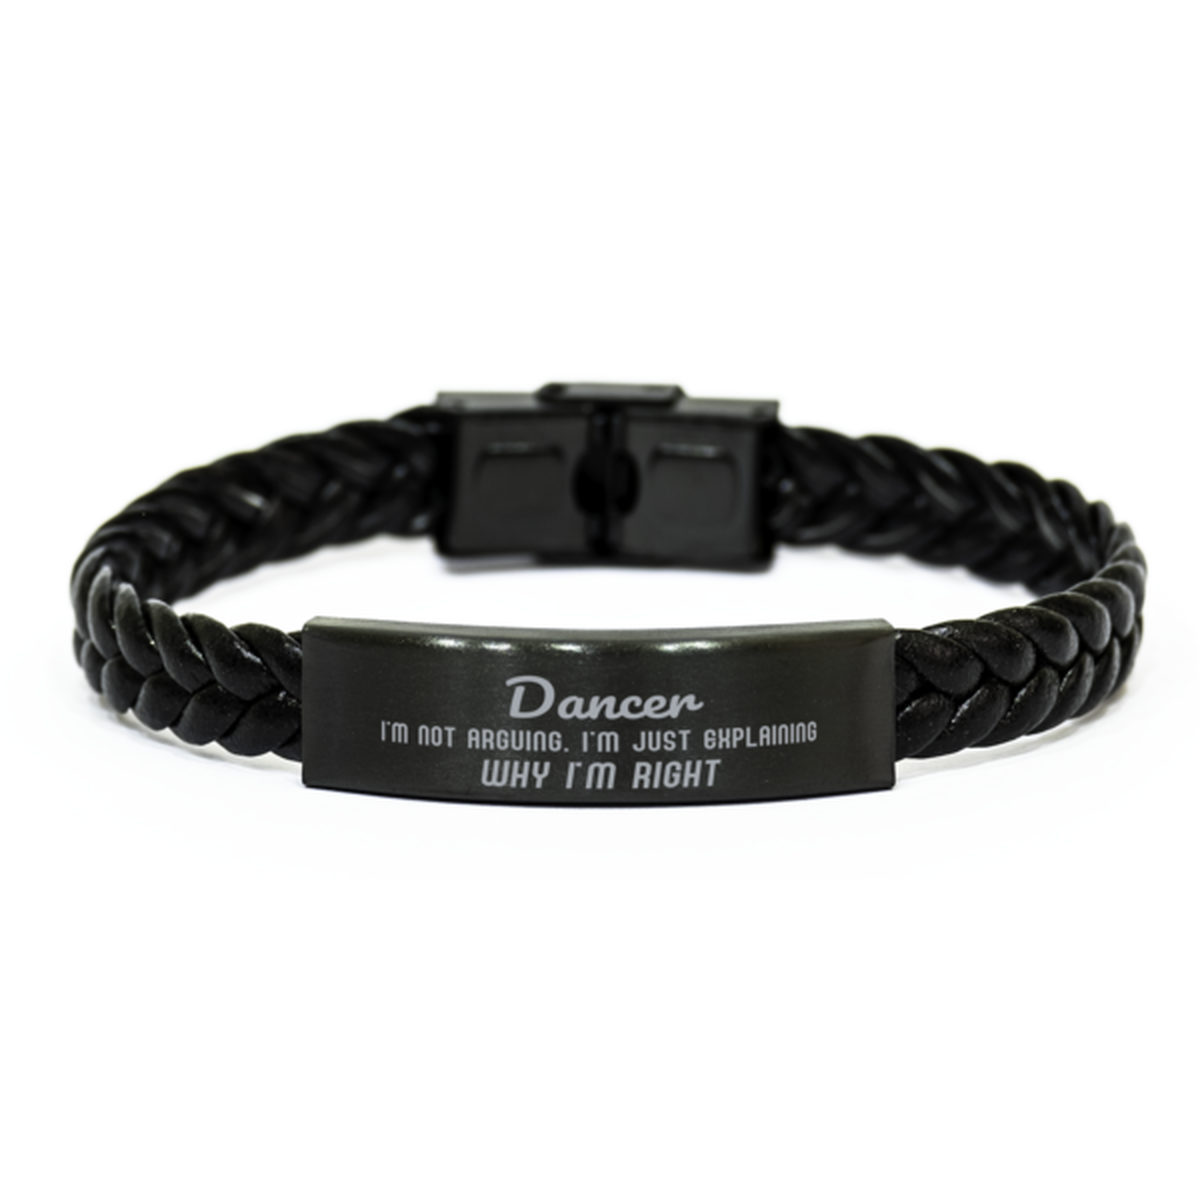 Dancer I'm not Arguing. I'm Just Explaining Why I'm RIGHT Braided Leather Bracelet, Graduation Birthday Christmas Dancer Gifts For Dancer Funny Saying Quote Present for Men Women Coworker